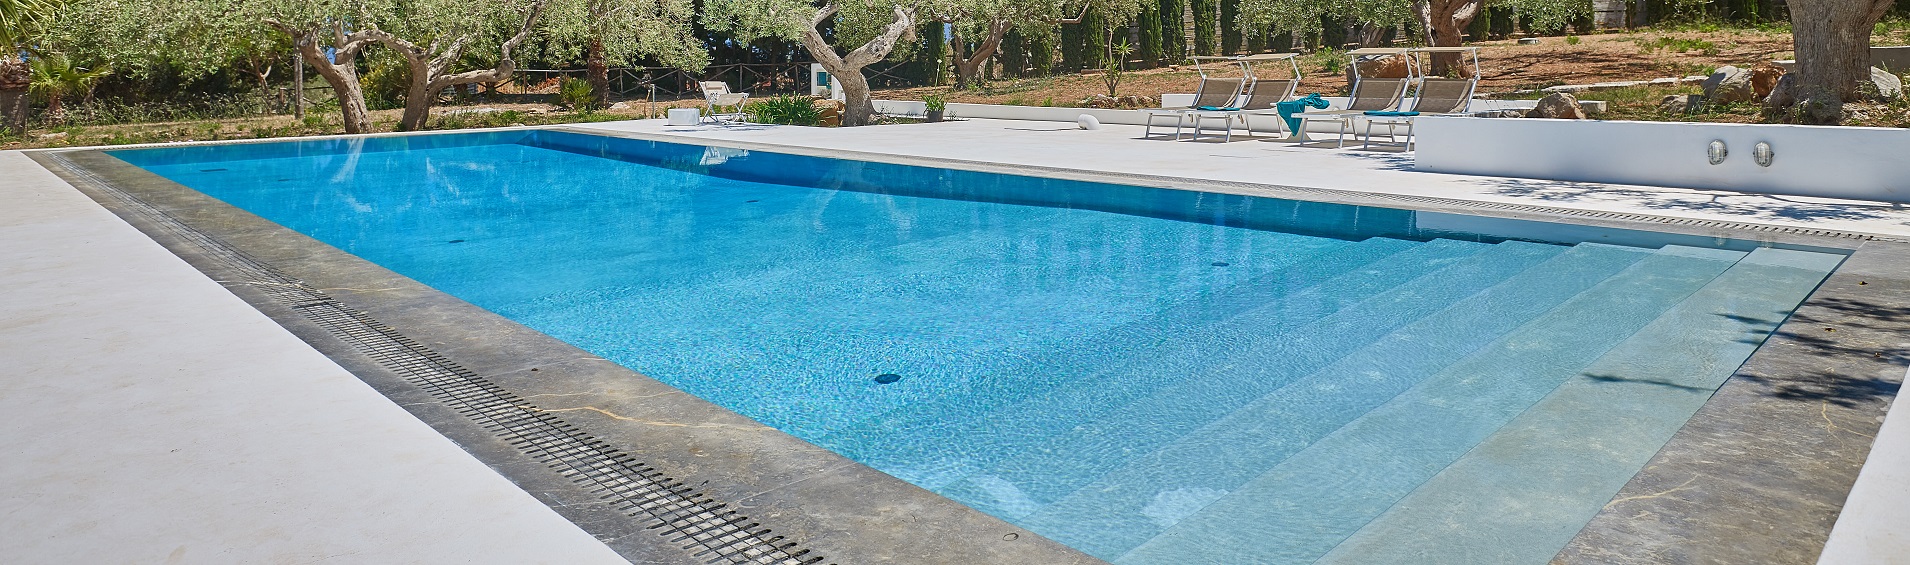 Villas in Sicily with private pool